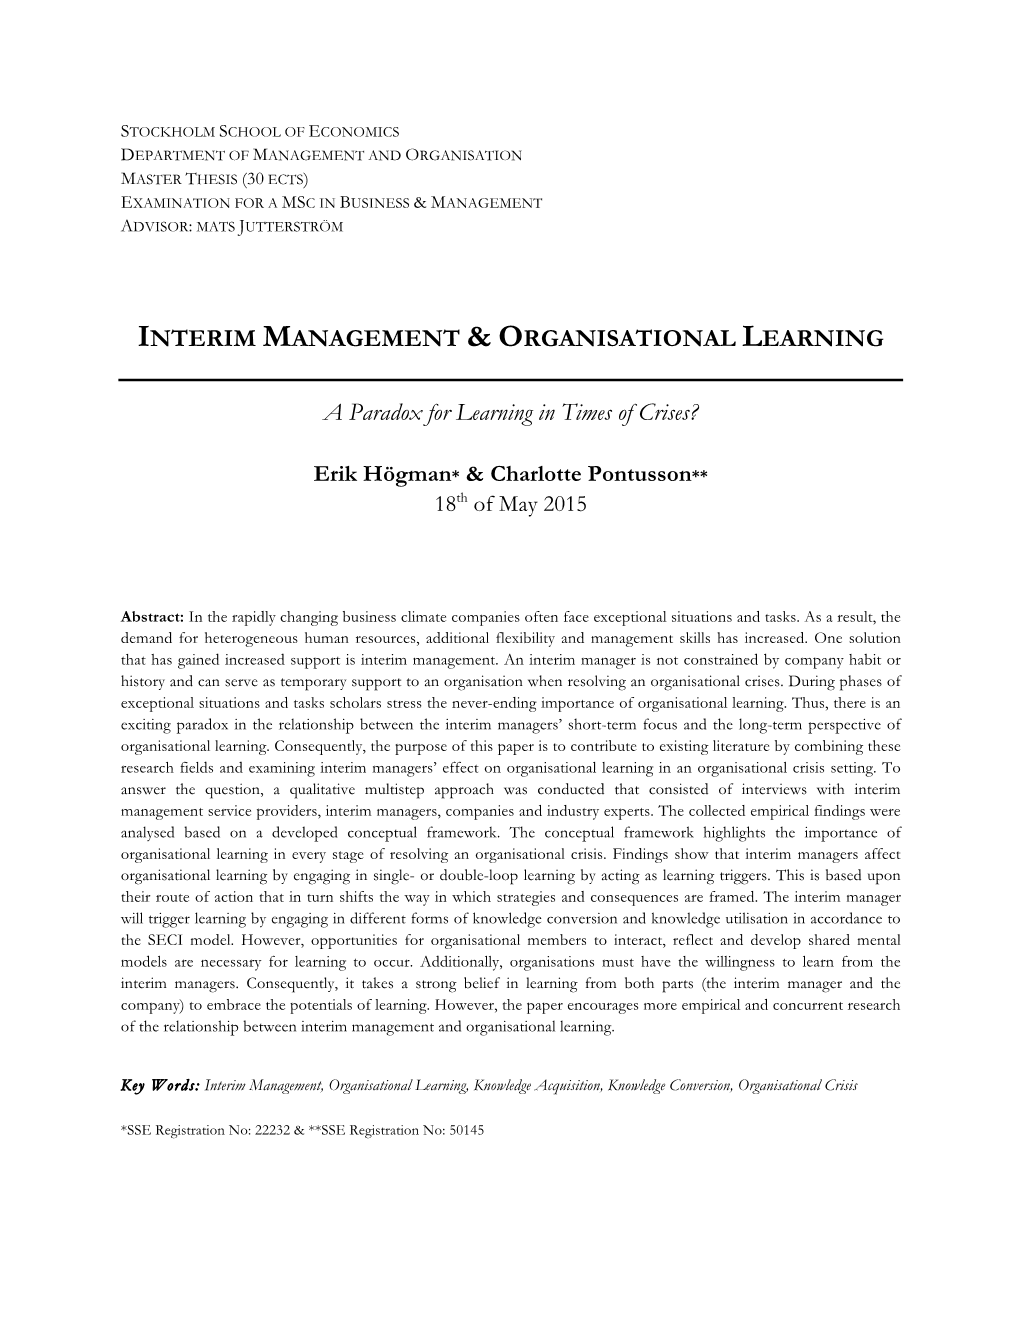 INTERIM MANAGEMENT & ORGANISATIONAL LEARNING a Paradox for Learning in Times of Crises?